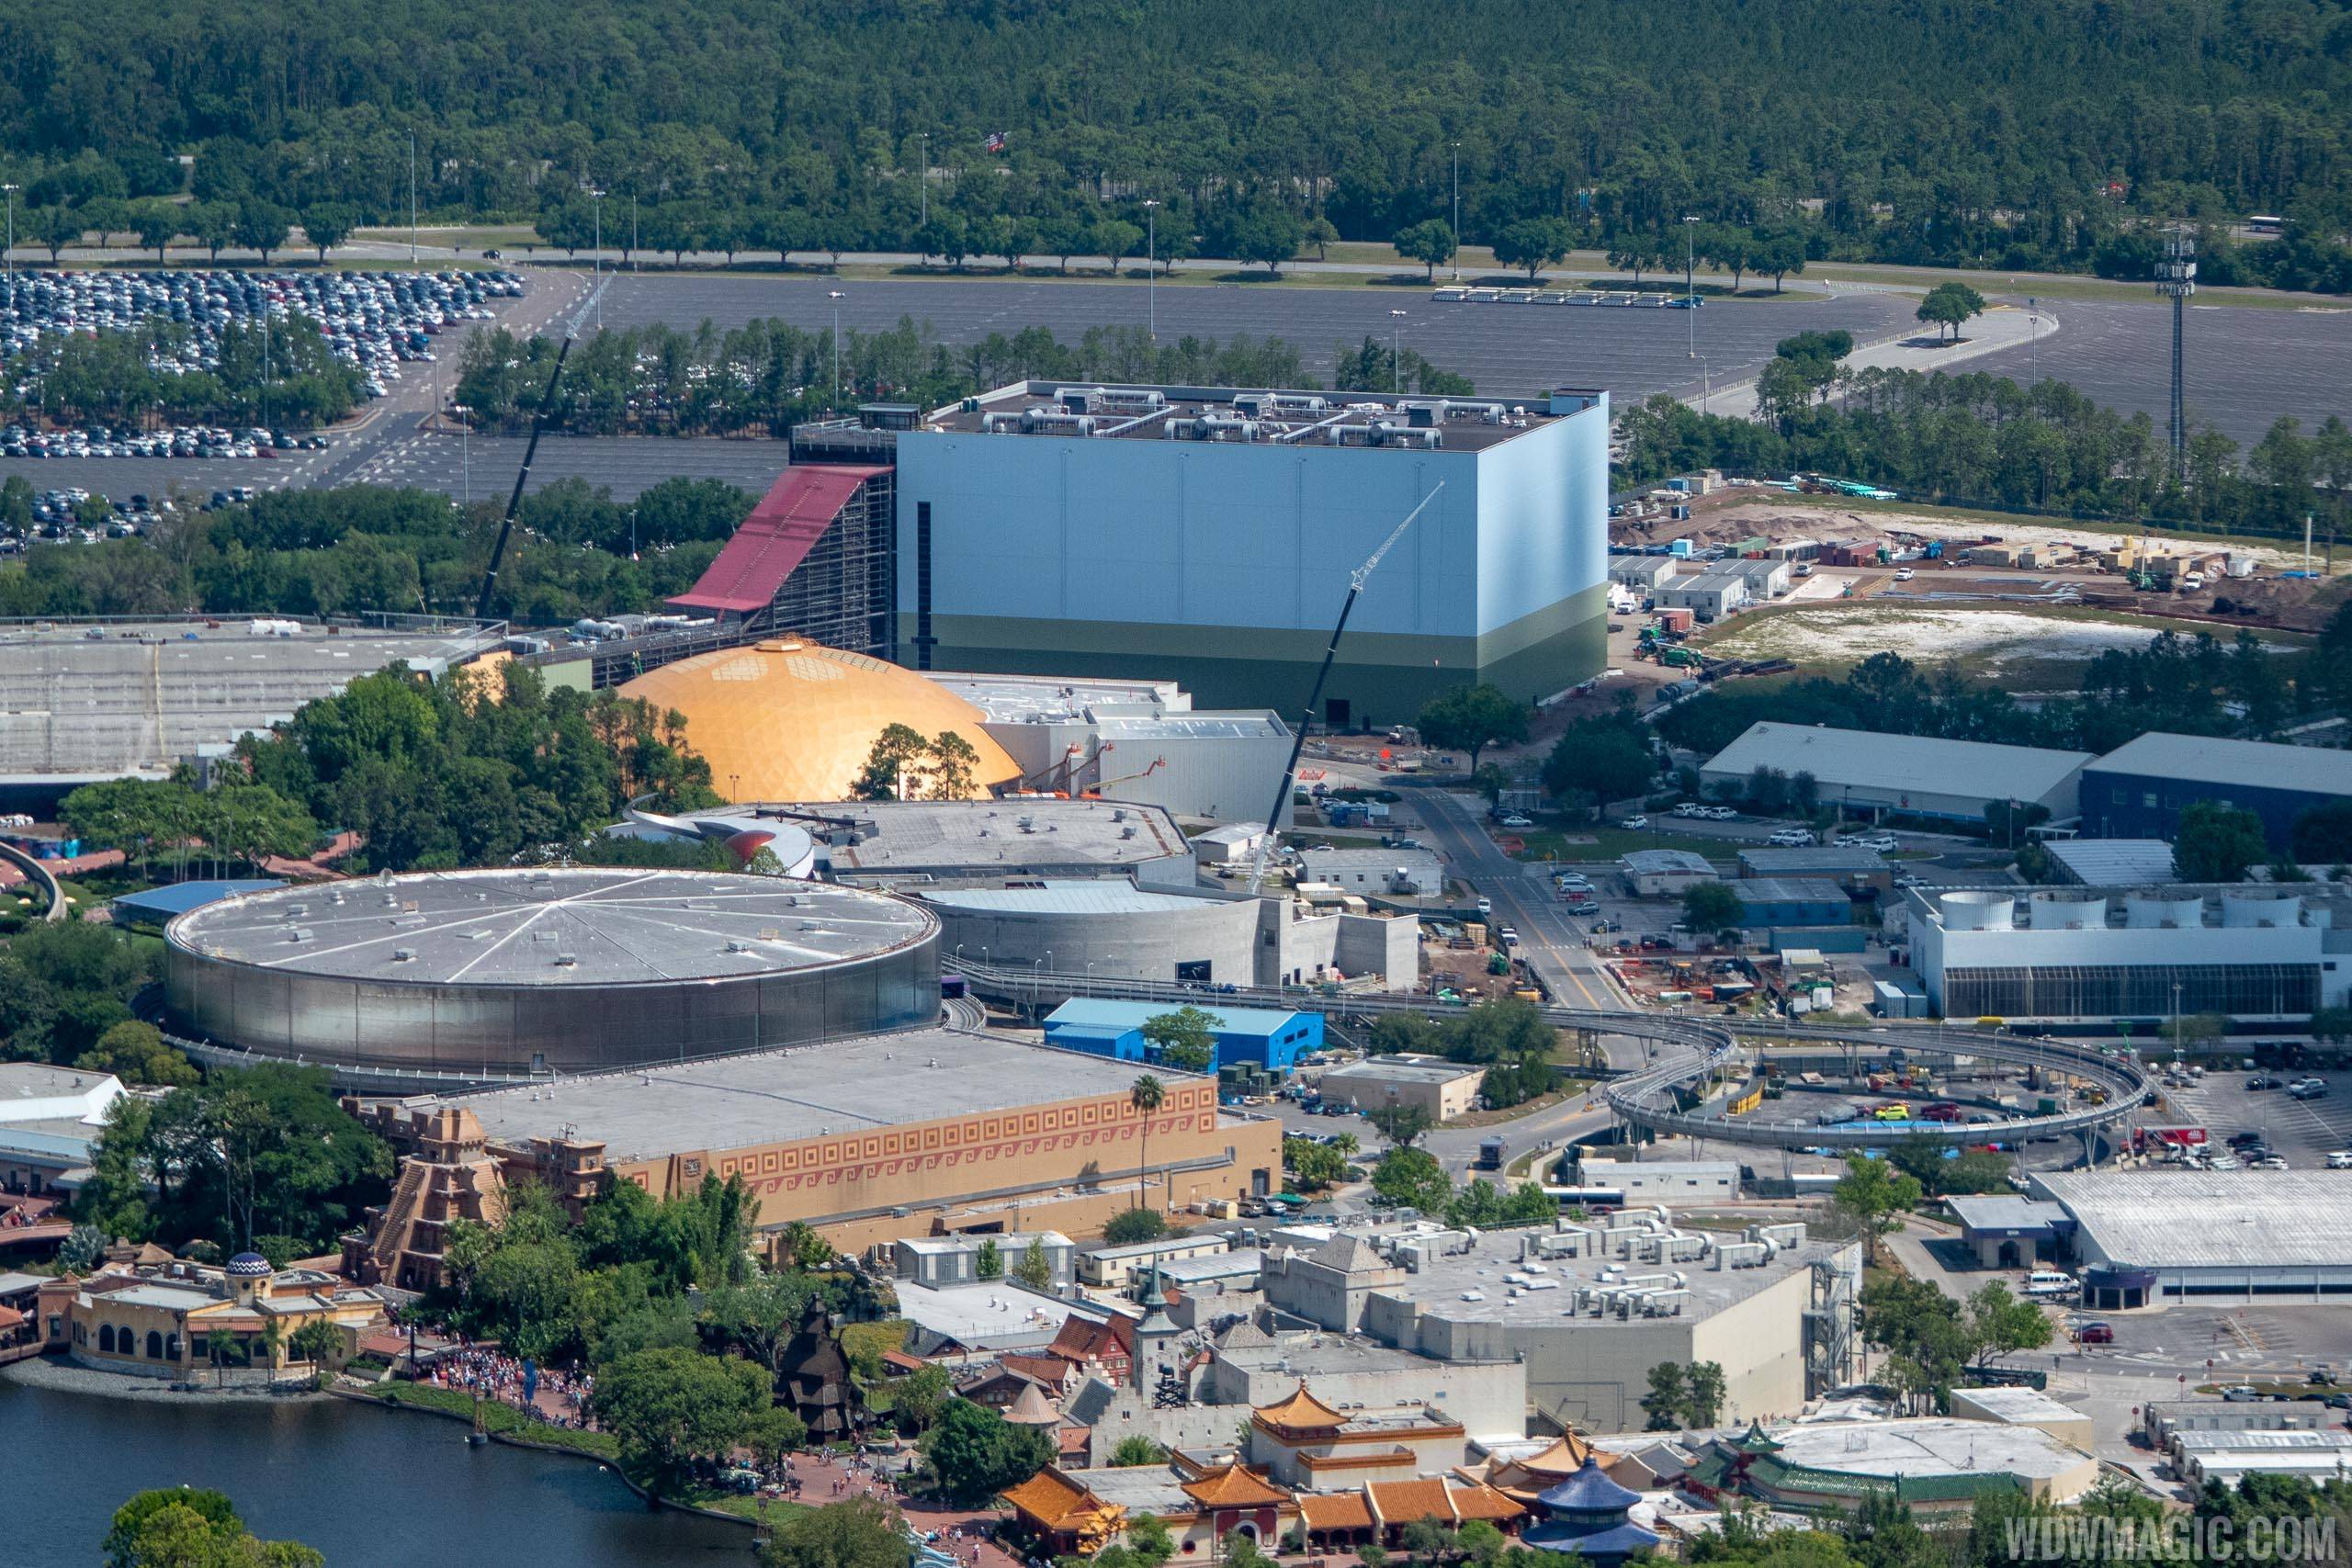 PHOTOS - Guardians of the Galaxy construction at Epcot